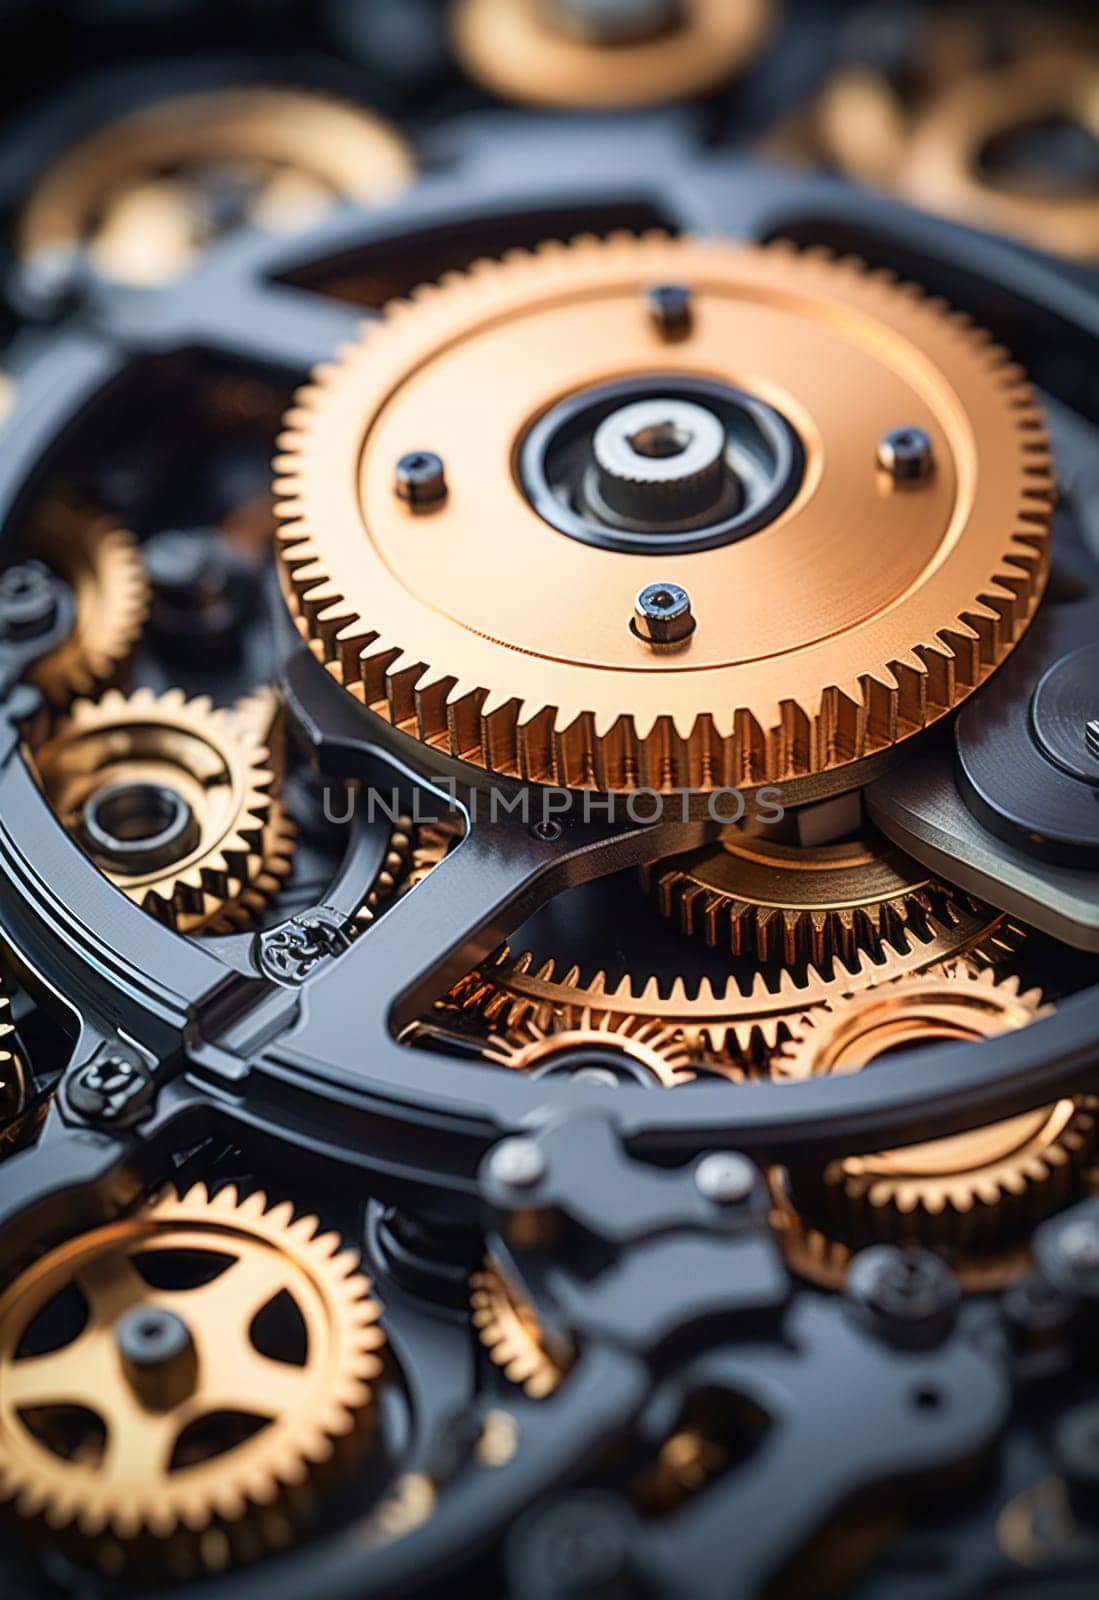 Close-up of the precision gears and gears of the clockwork, showcasing the intricate details and mechanical complexity of the watch.